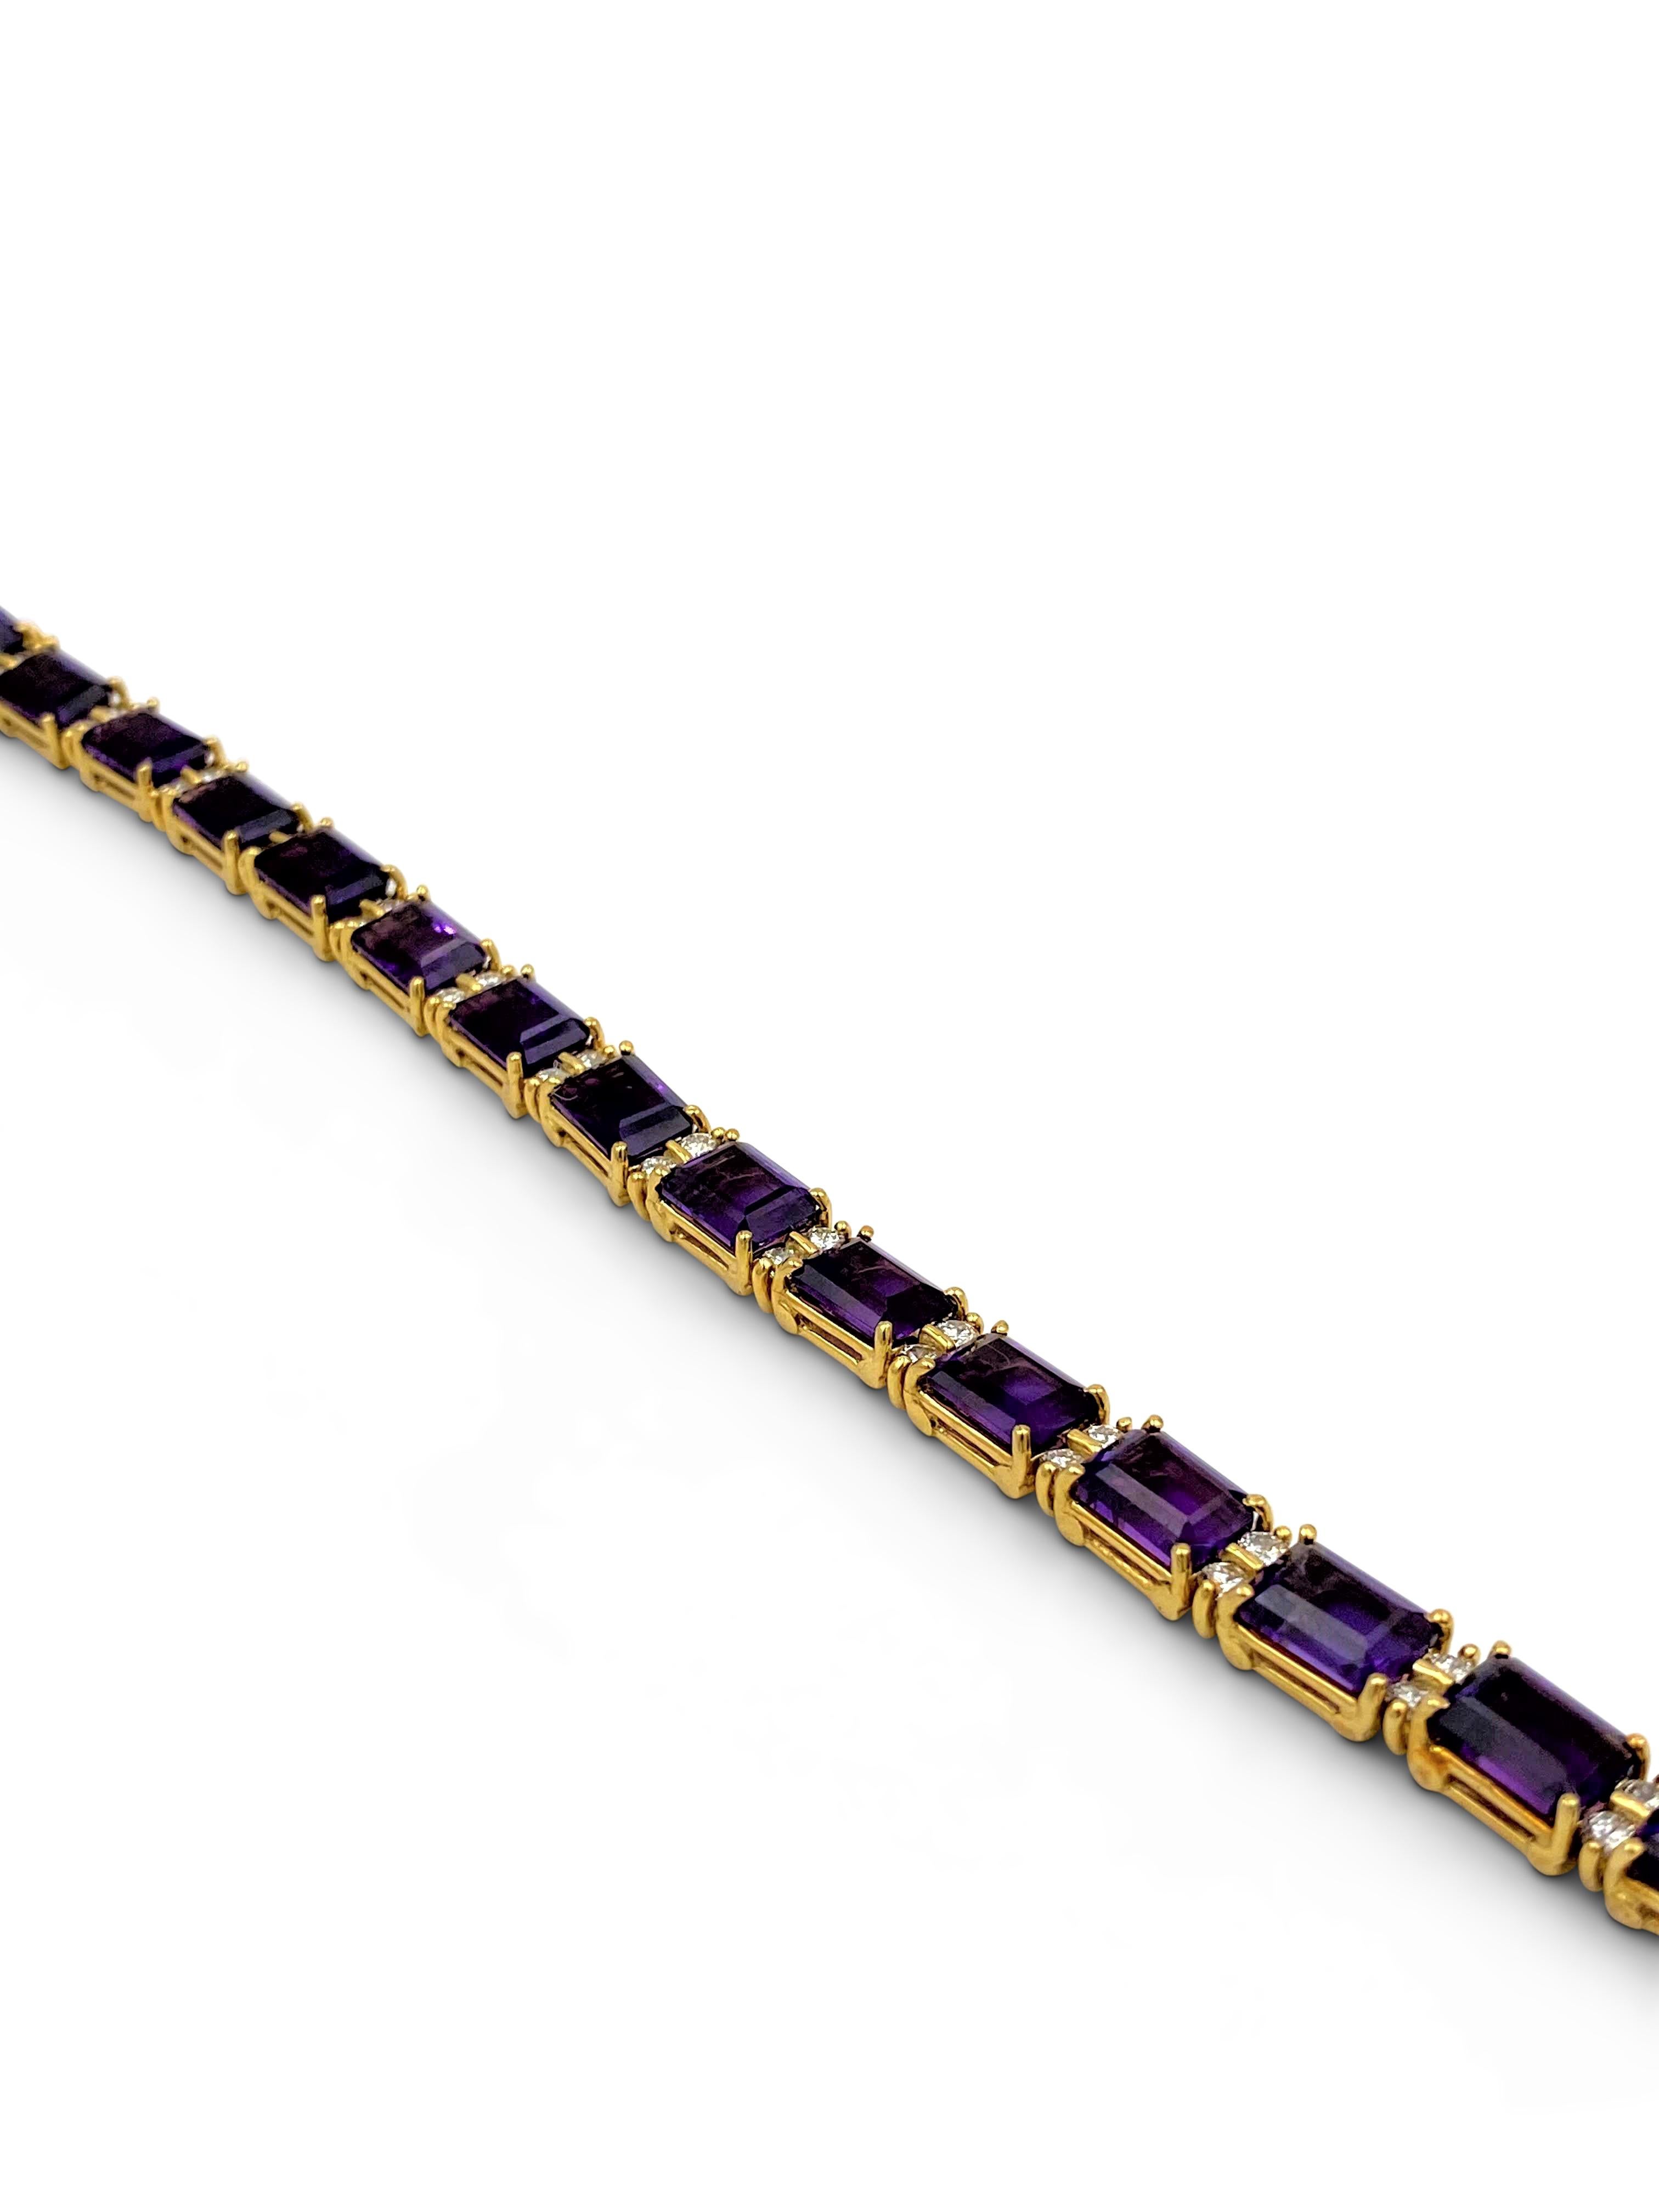 A vibrant line bracelet set with an estimated 20 carats of amethyst stones separated by round brilliant cut diamonds (E-F color, VS clarity) weighing approximately 1.60 carats. Signed La Triomphe, maker's mark. The bracelet is not presented with